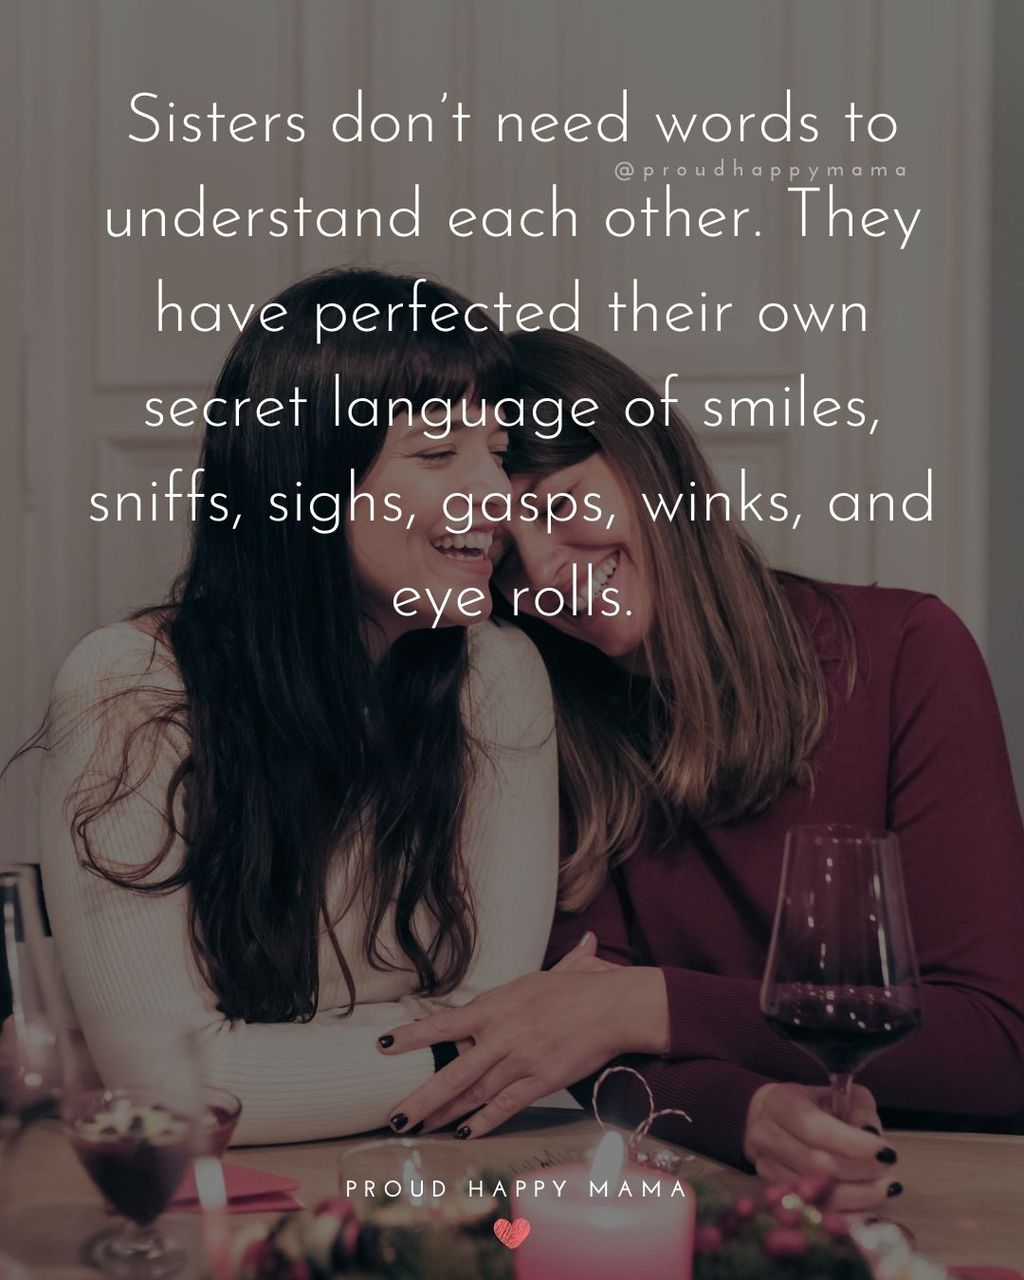 Sister Quotes - Sisters dont need words to understand each other. They have perfected their own secret language of smiles, sniffs, sighs, gasps, winks, and eye rolls.